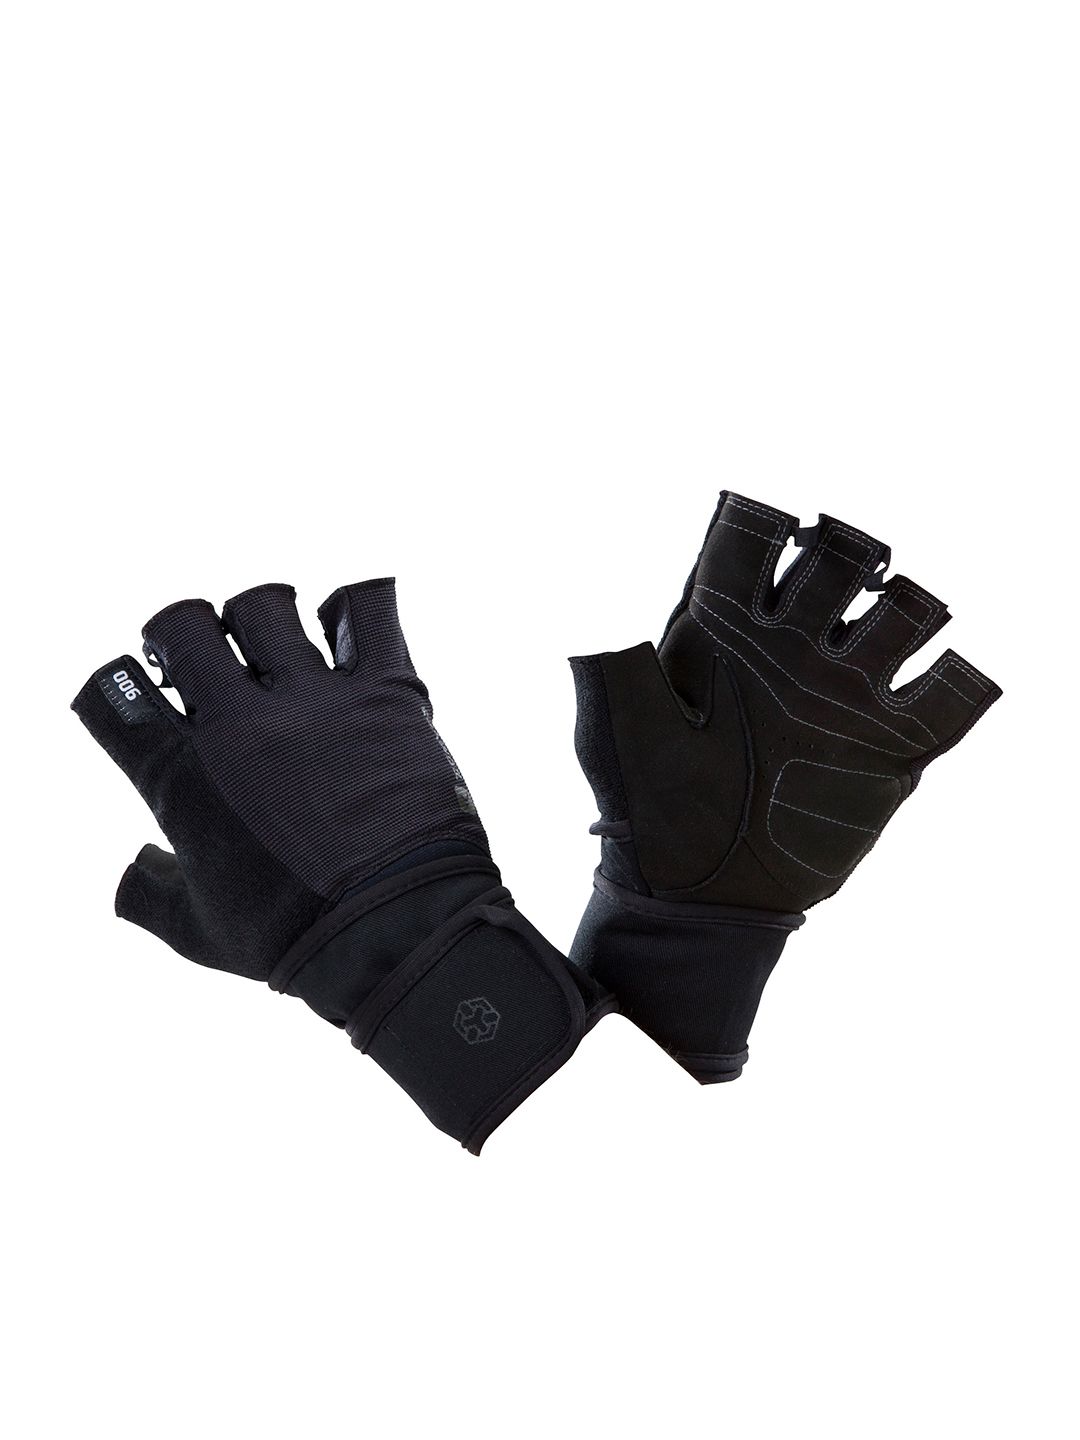 Domyos By Decathlon Black Solid Weight Training Gym Glove with Wrist Strap Price in India